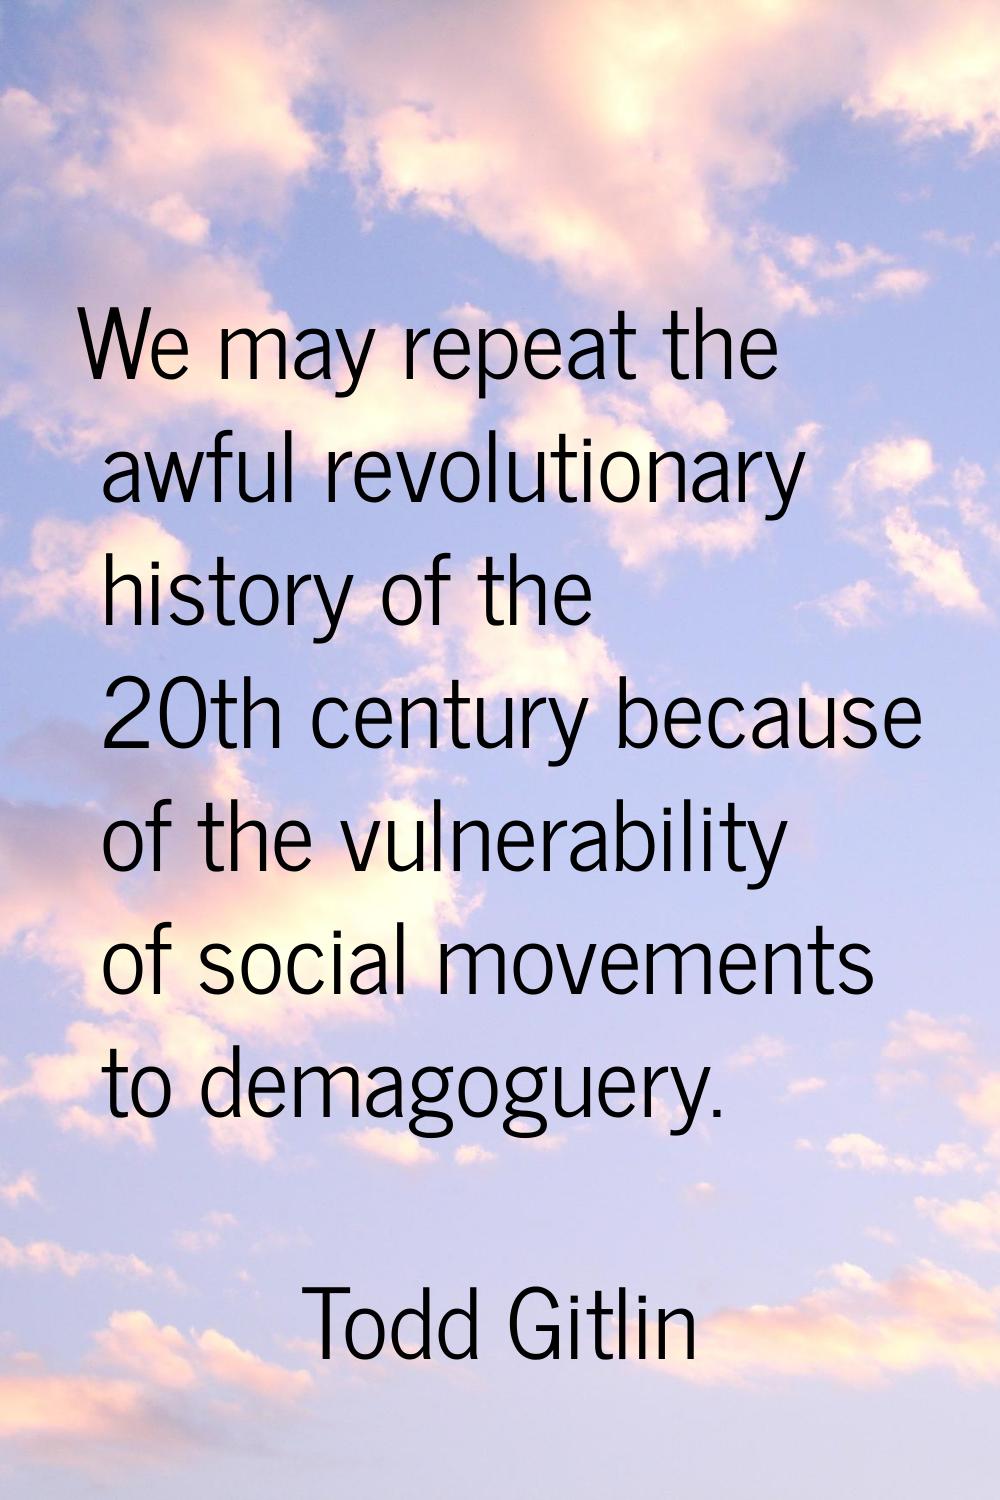 We may repeat the awful revolutionary history of the 20th century because of the vulnerability of s